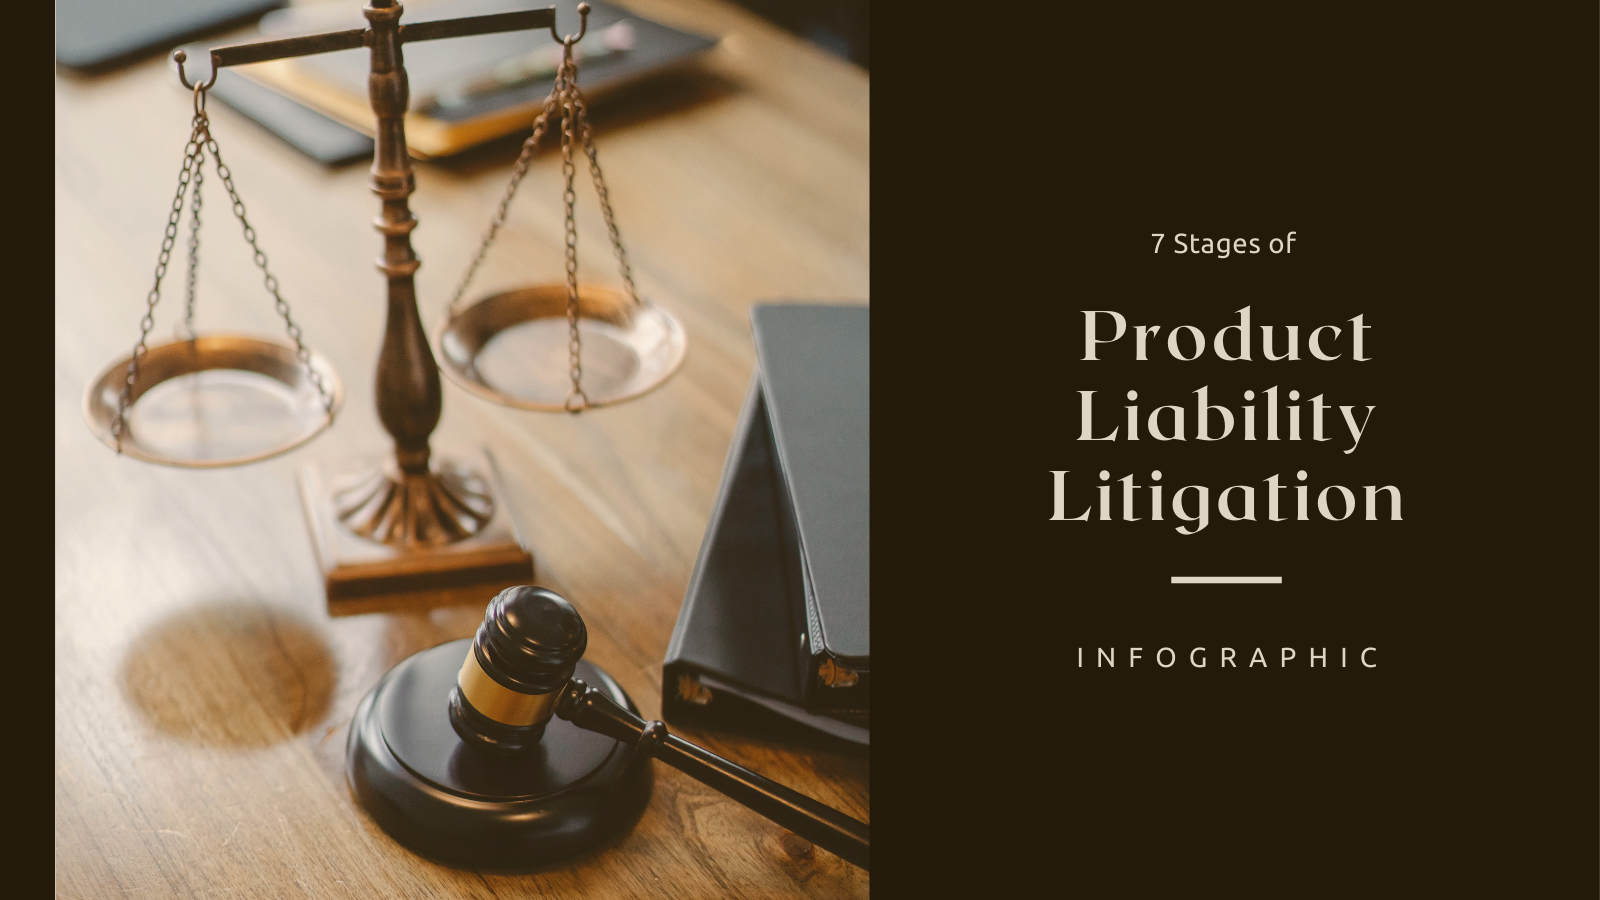 7 Stages of Product Liability Litigation